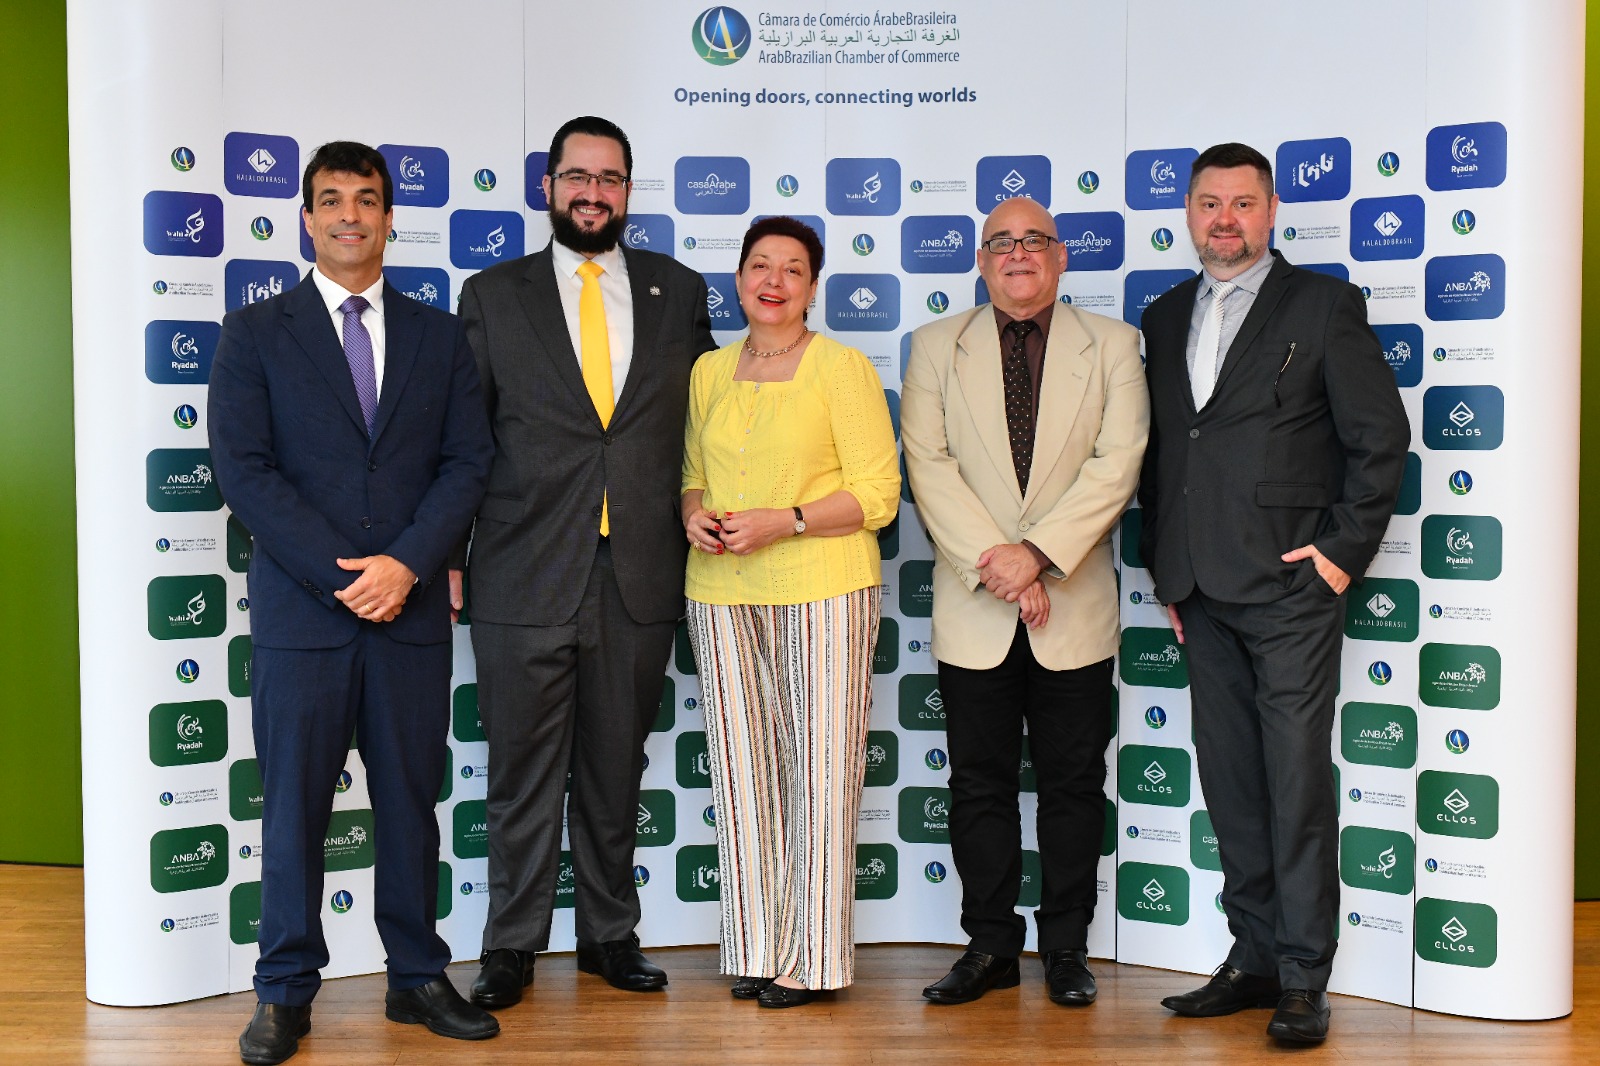 Entrepreneurs from São Paulo articulate new international projects in Santa Catarina